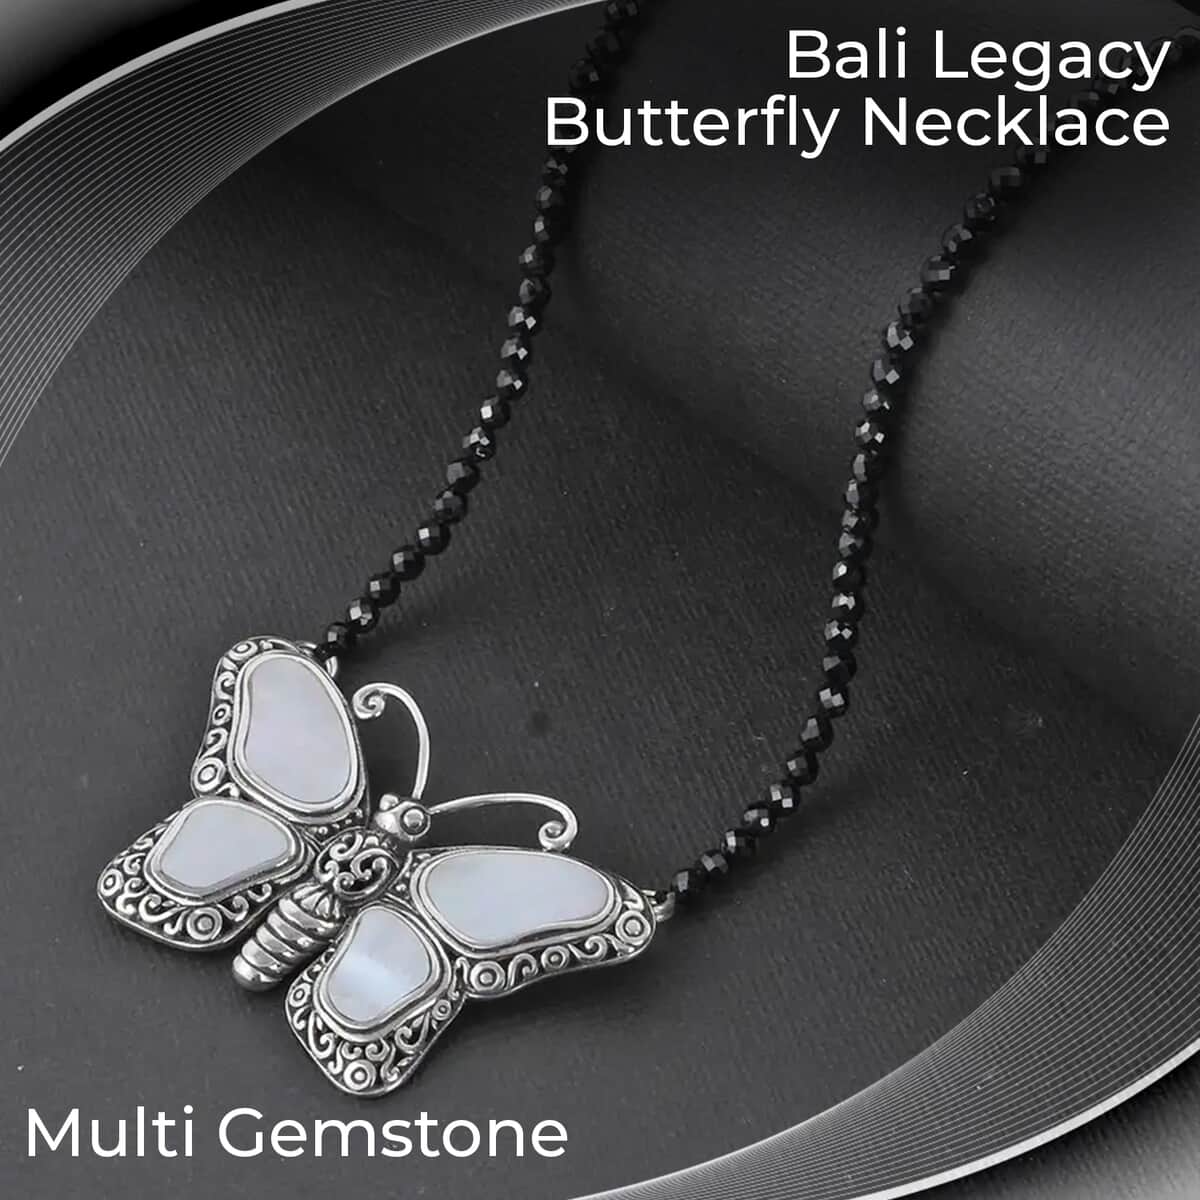 Multi Gemstone Necklace, Butterfly Necklace, Bali Legacy Necklace, Mother of Pearl Necklace, Thai Black Spinel Bead Necklace, 20 Inches Necklace, Sterling Silver Necklace 25.00 ctw image number 1